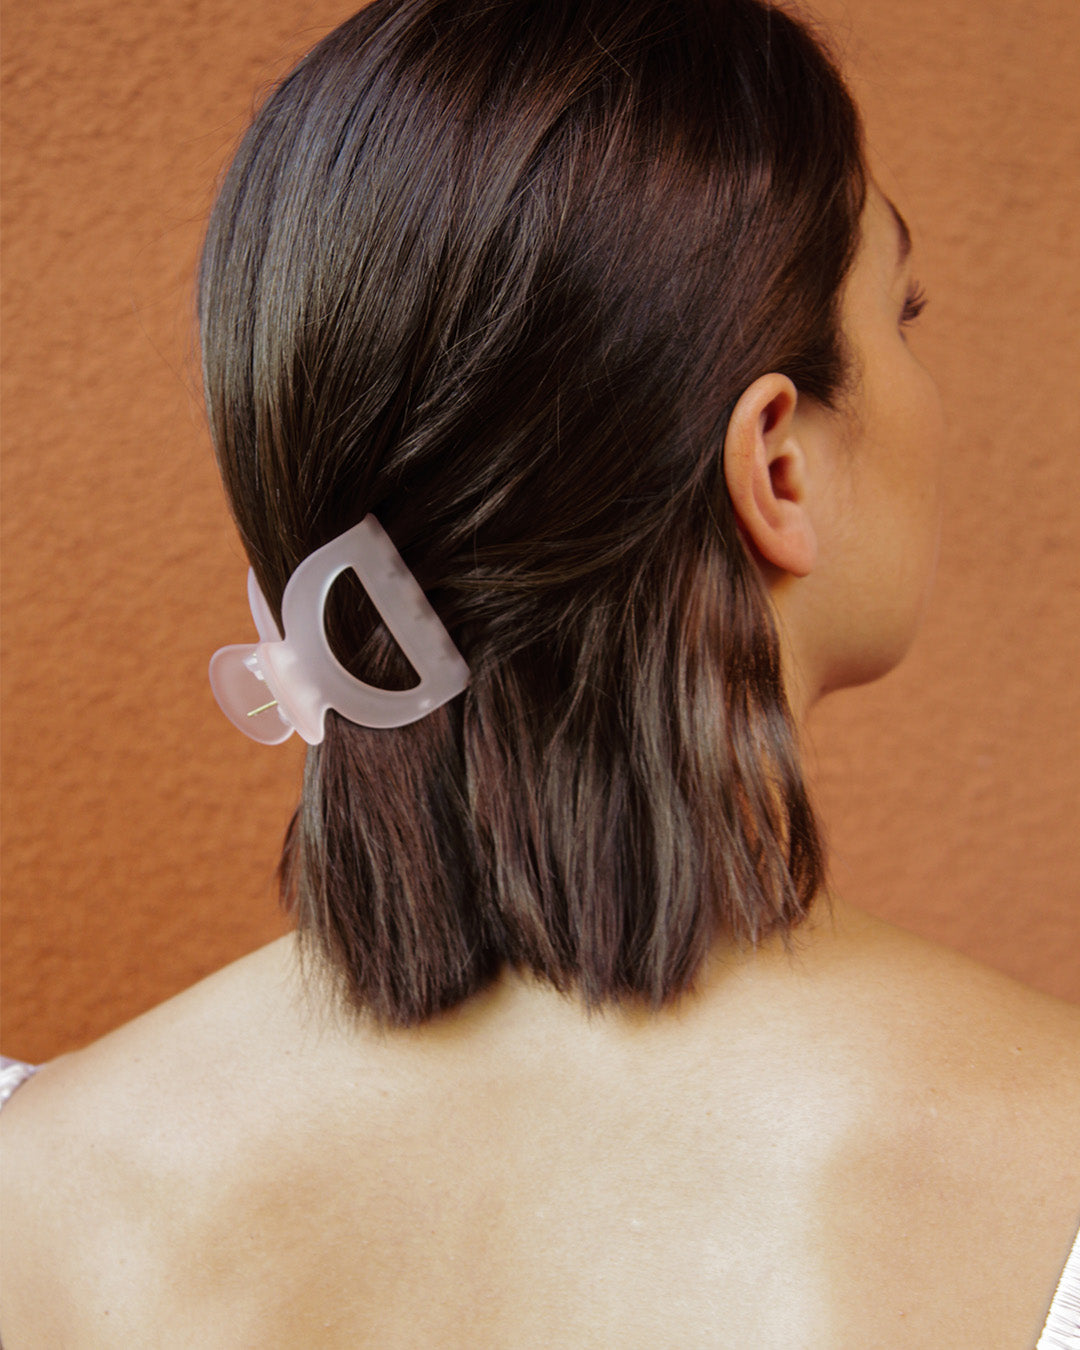 BANDED Women’s Premium Hair Accessories - El Paseo - Translucent Claw Clips